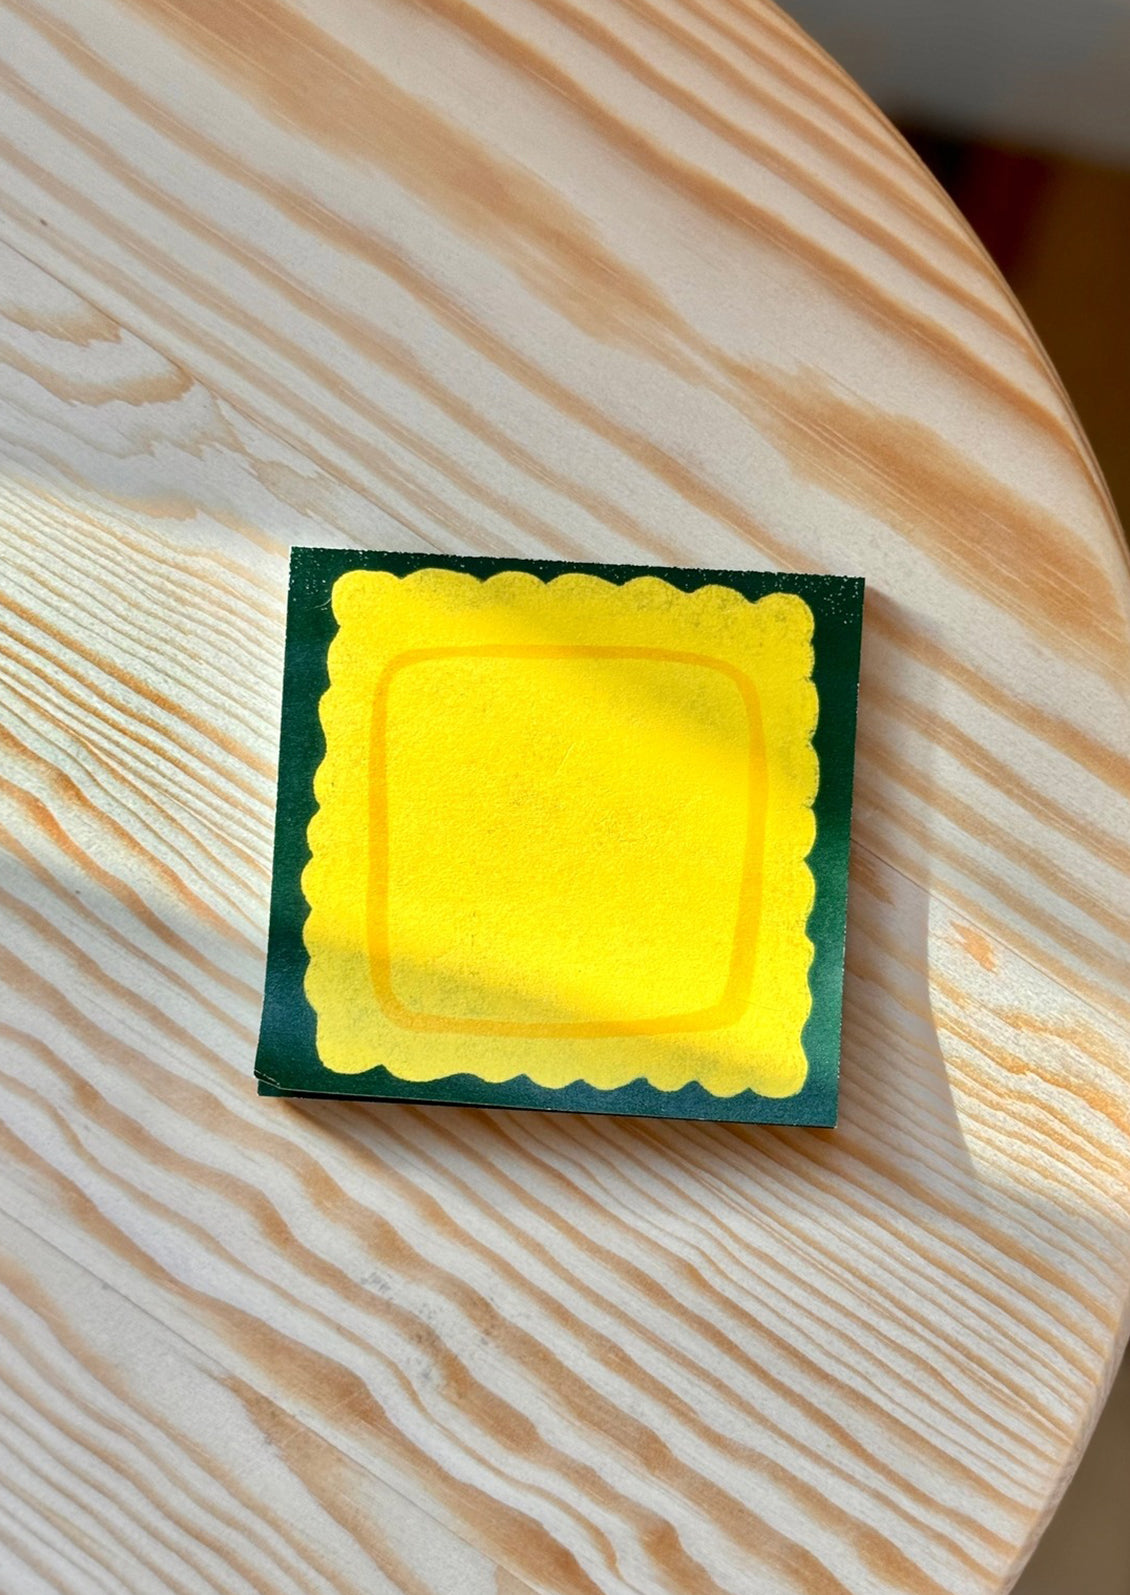 A stack of sticky notes with printed pasta theme.